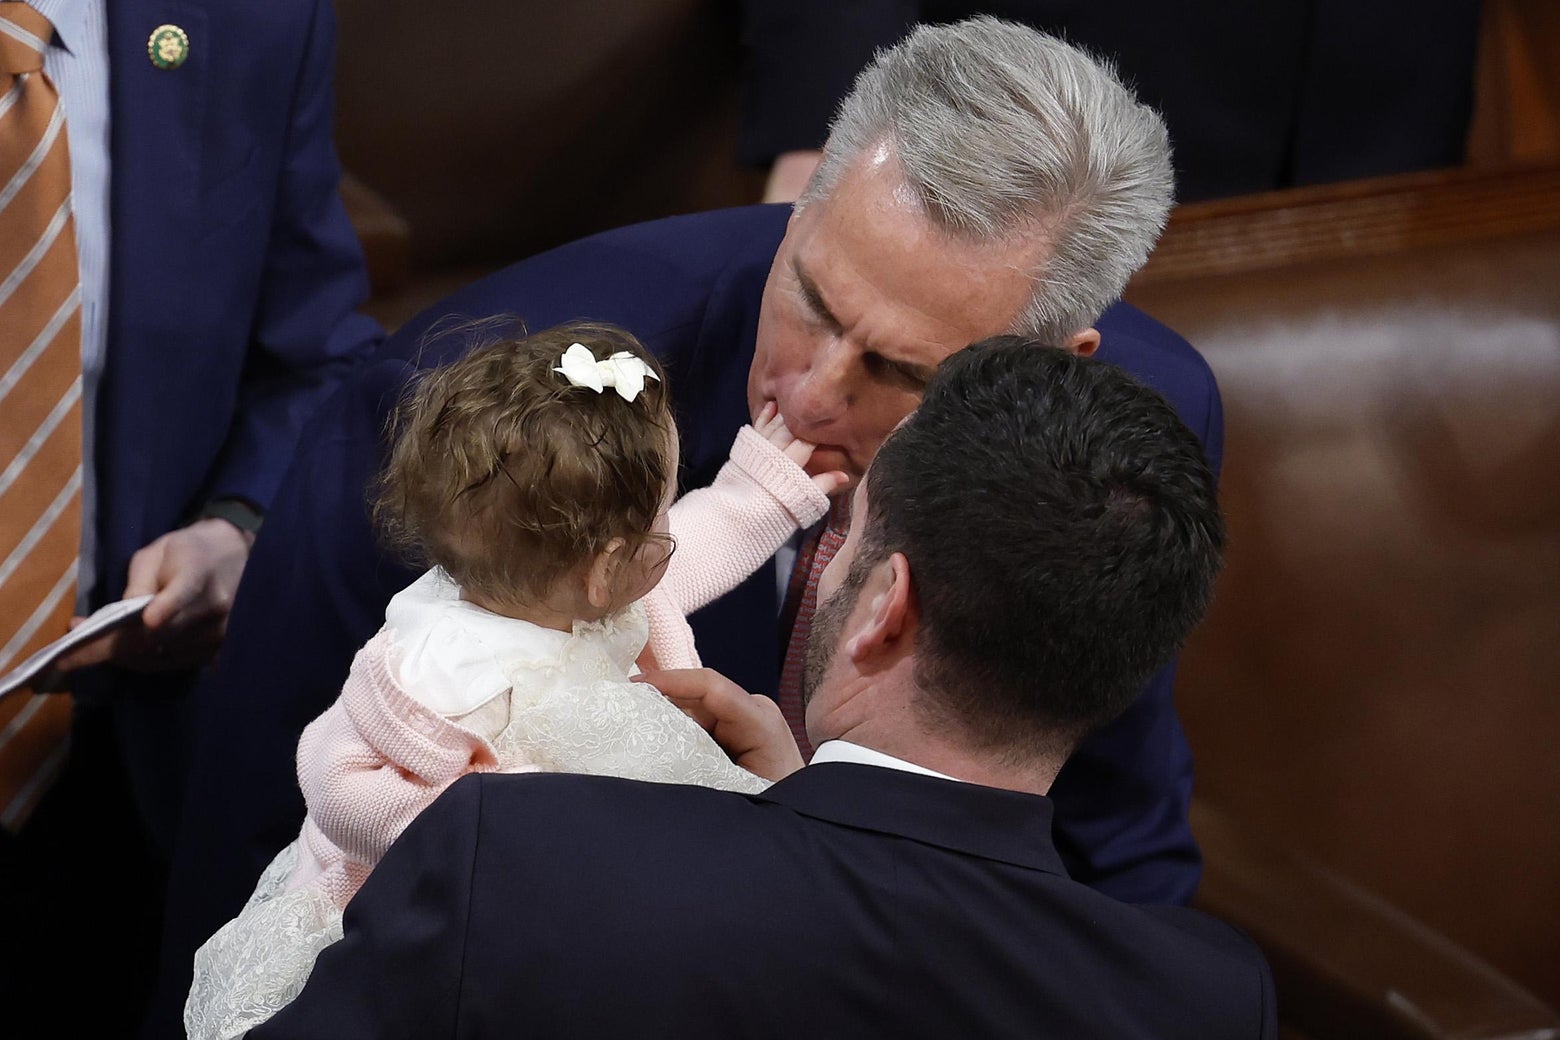 What’s Up With Kevin McCarthy Nibbling on That Baby’s Hand?